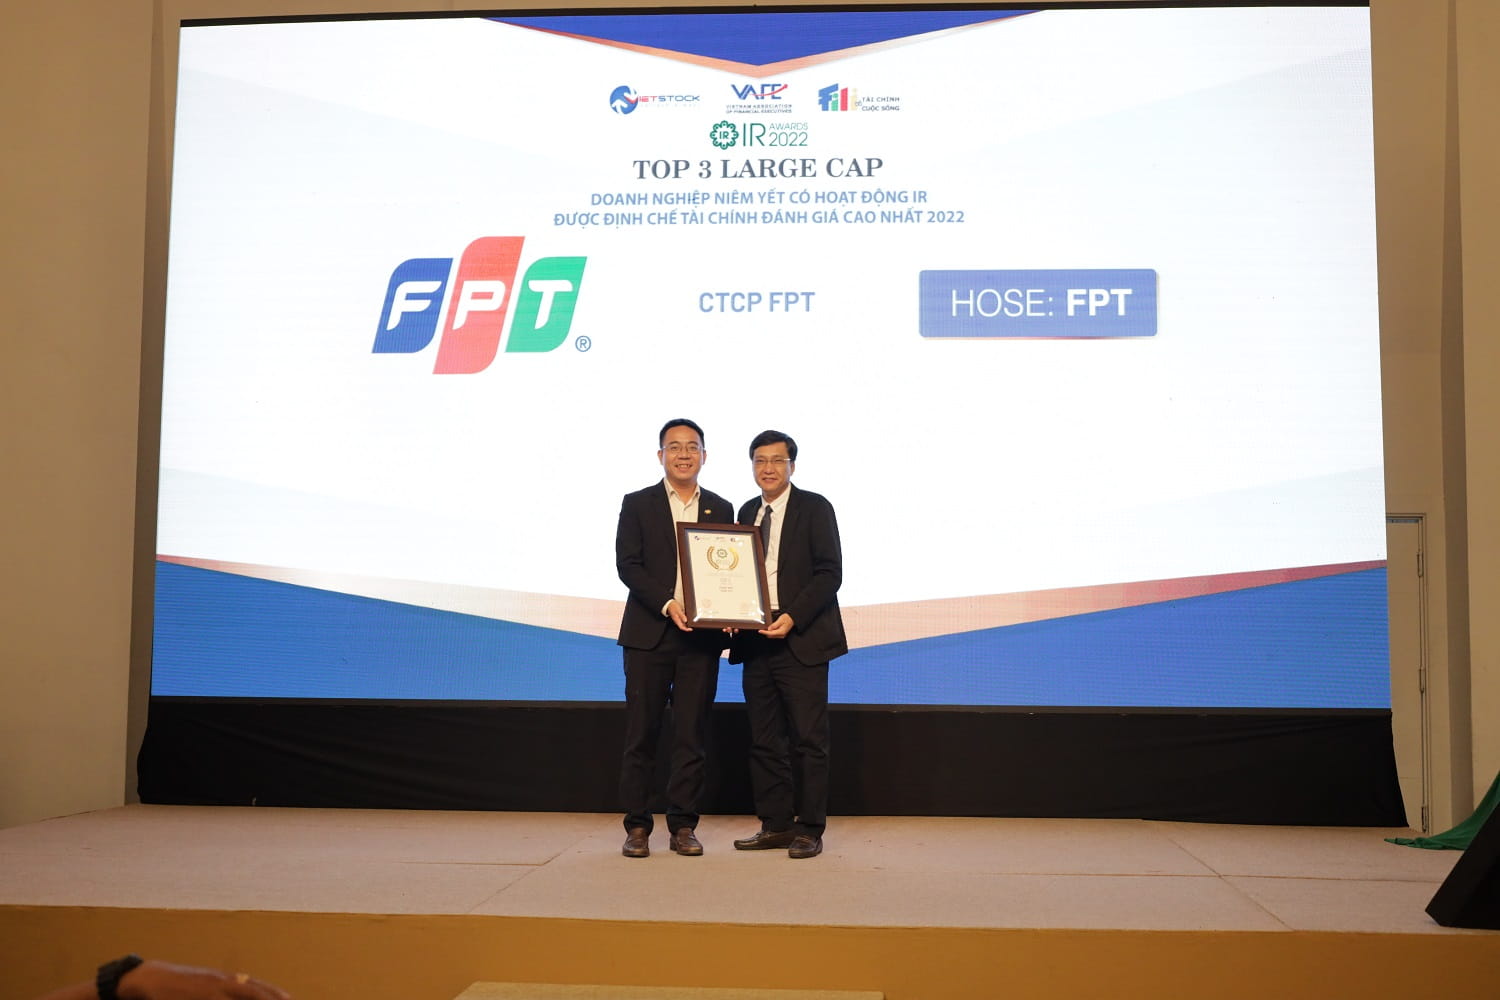 Representative of FPT, Mr. Vo Dang Phat, CMO, received the award of Top 3 Large-caps with the most appreciated IR activities by financial institutions in 2022